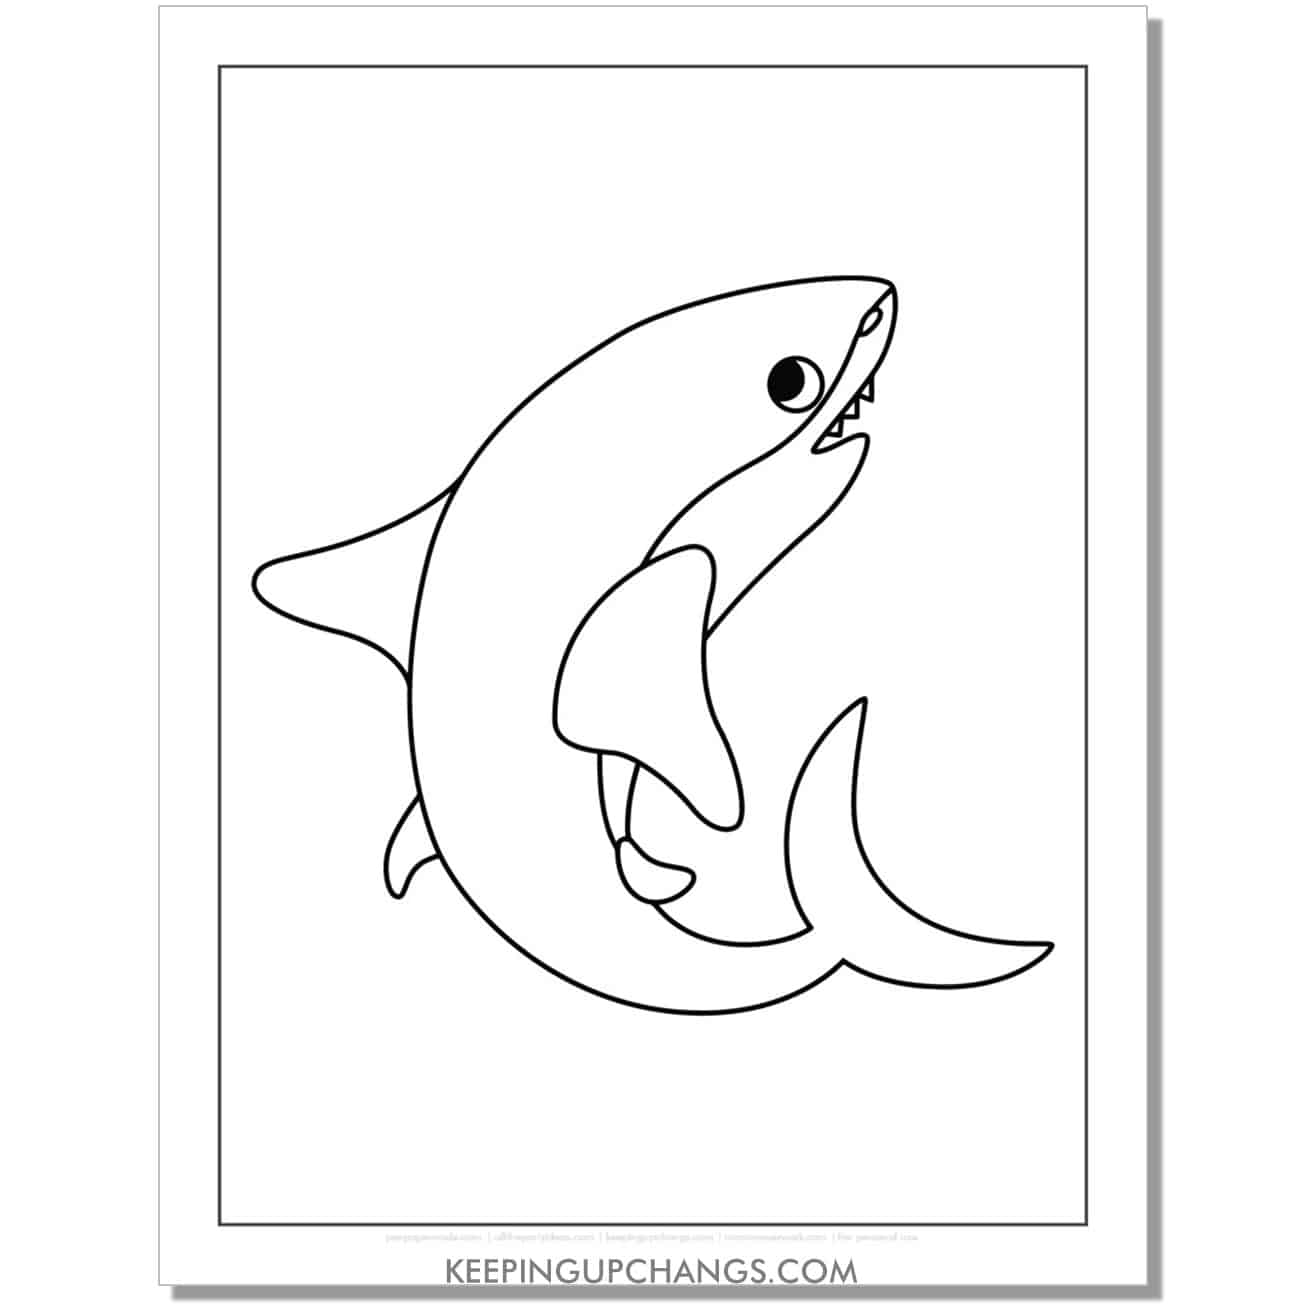 free back of shark coloring page, sheet.